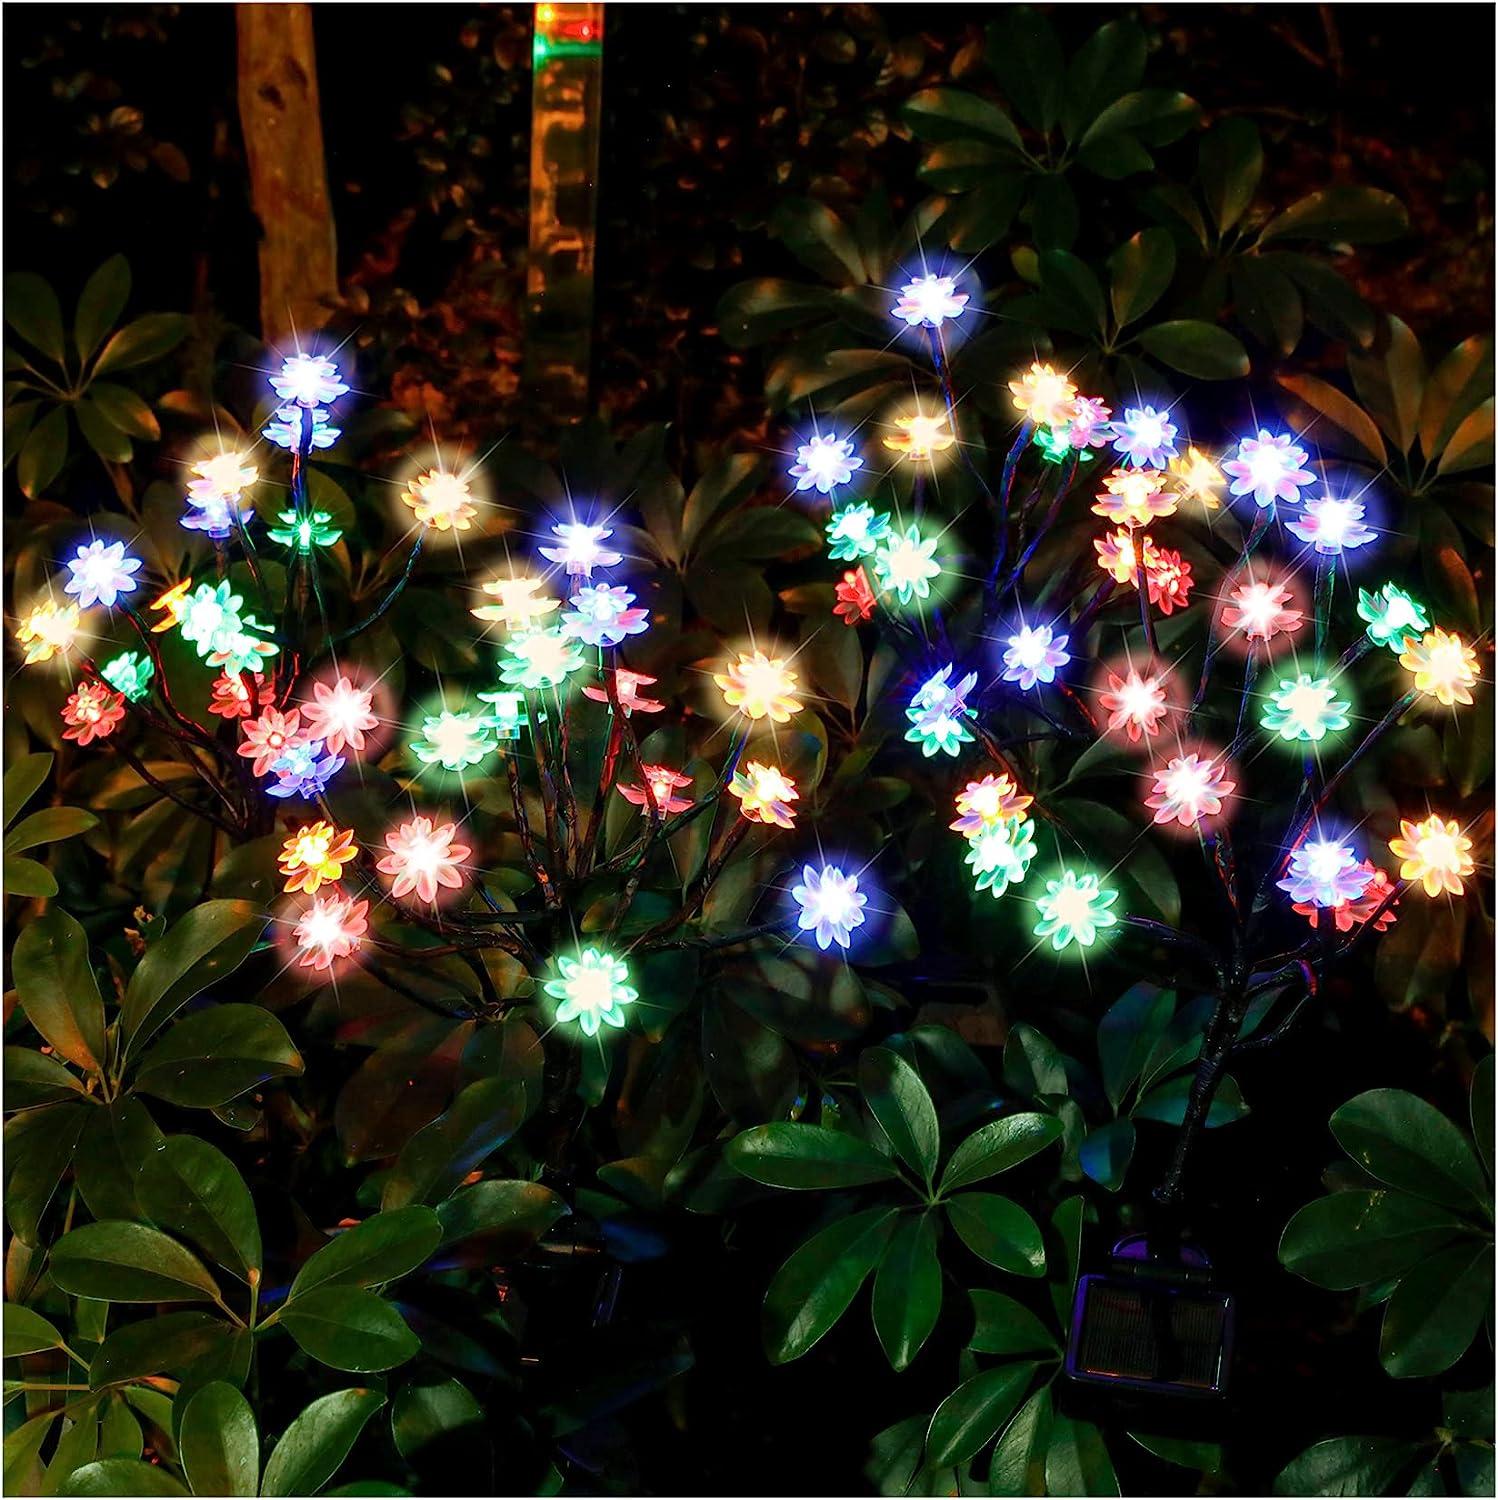 TONULAX Newest Solar Powered Decorative Lights with [...]